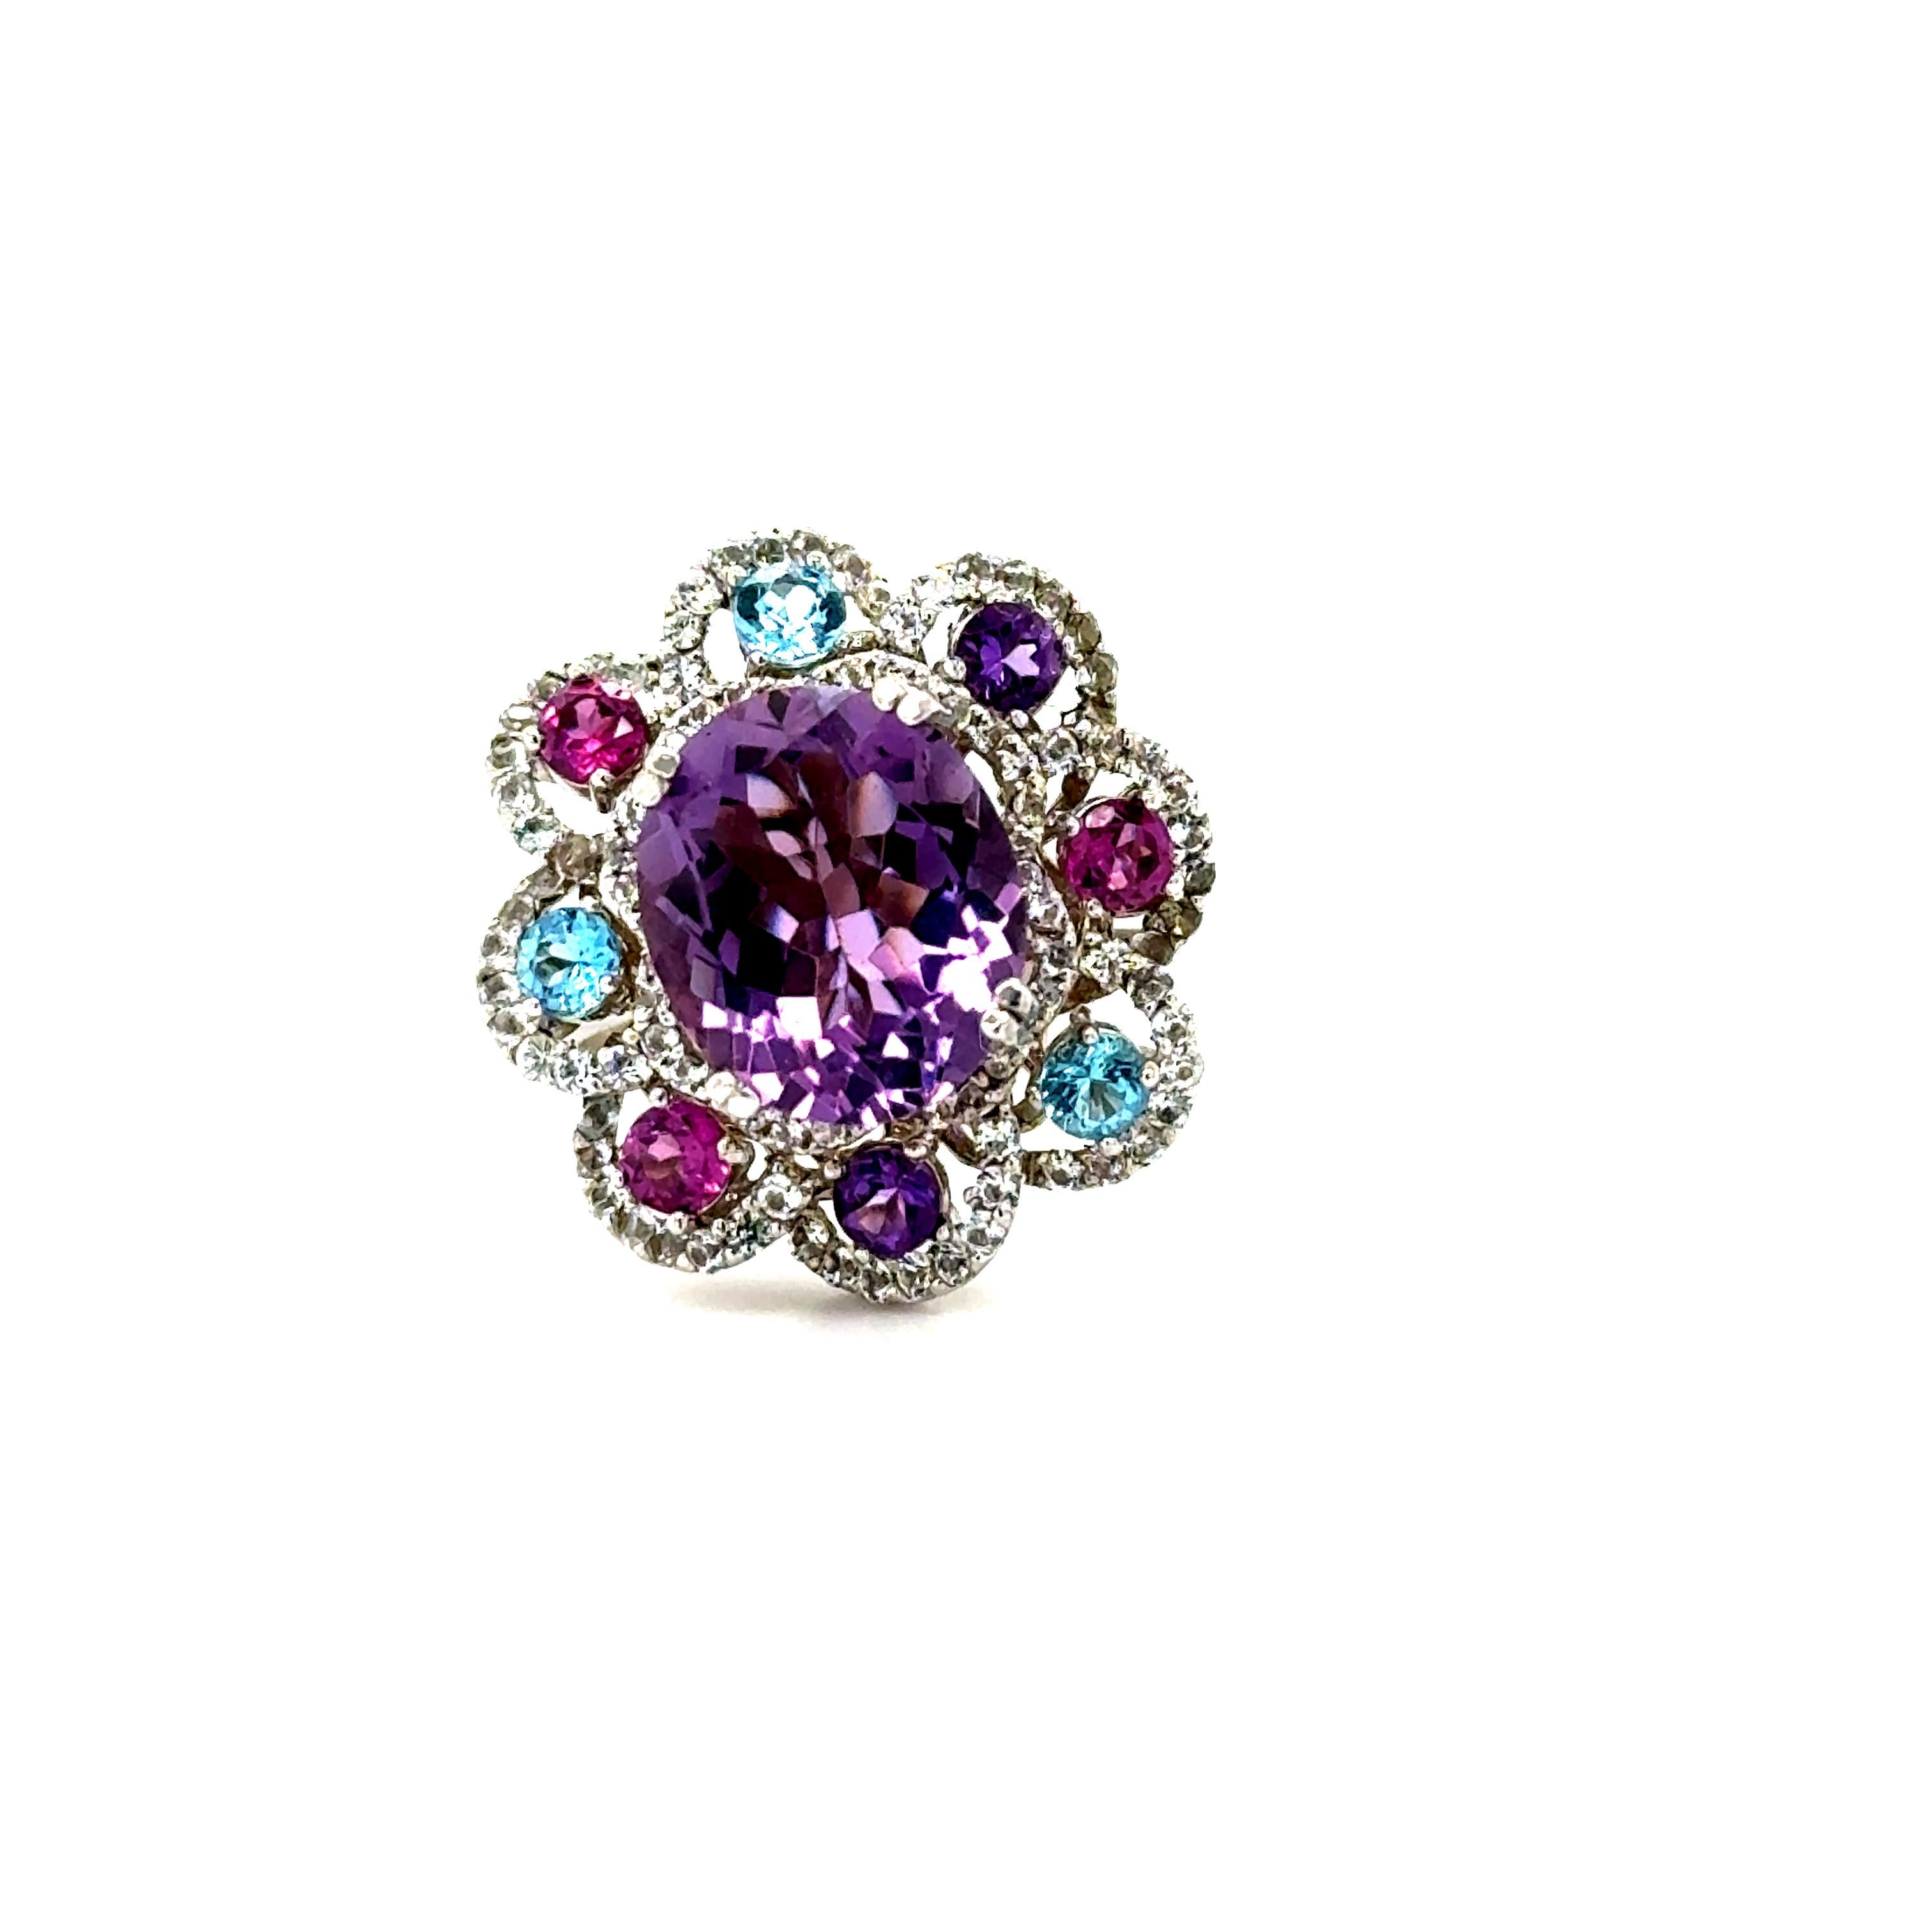 5.87 Carat Amethyst Sapphire and Topaz White Gold Cocktail Ring

This beautiful ring has a Oval Cut 3.79 carat Amethyst that measures at approximately 10 mm x 12 mm. There are Blue Topaz, Garnet, Amethysts surrounding the ring that weigh 0.98